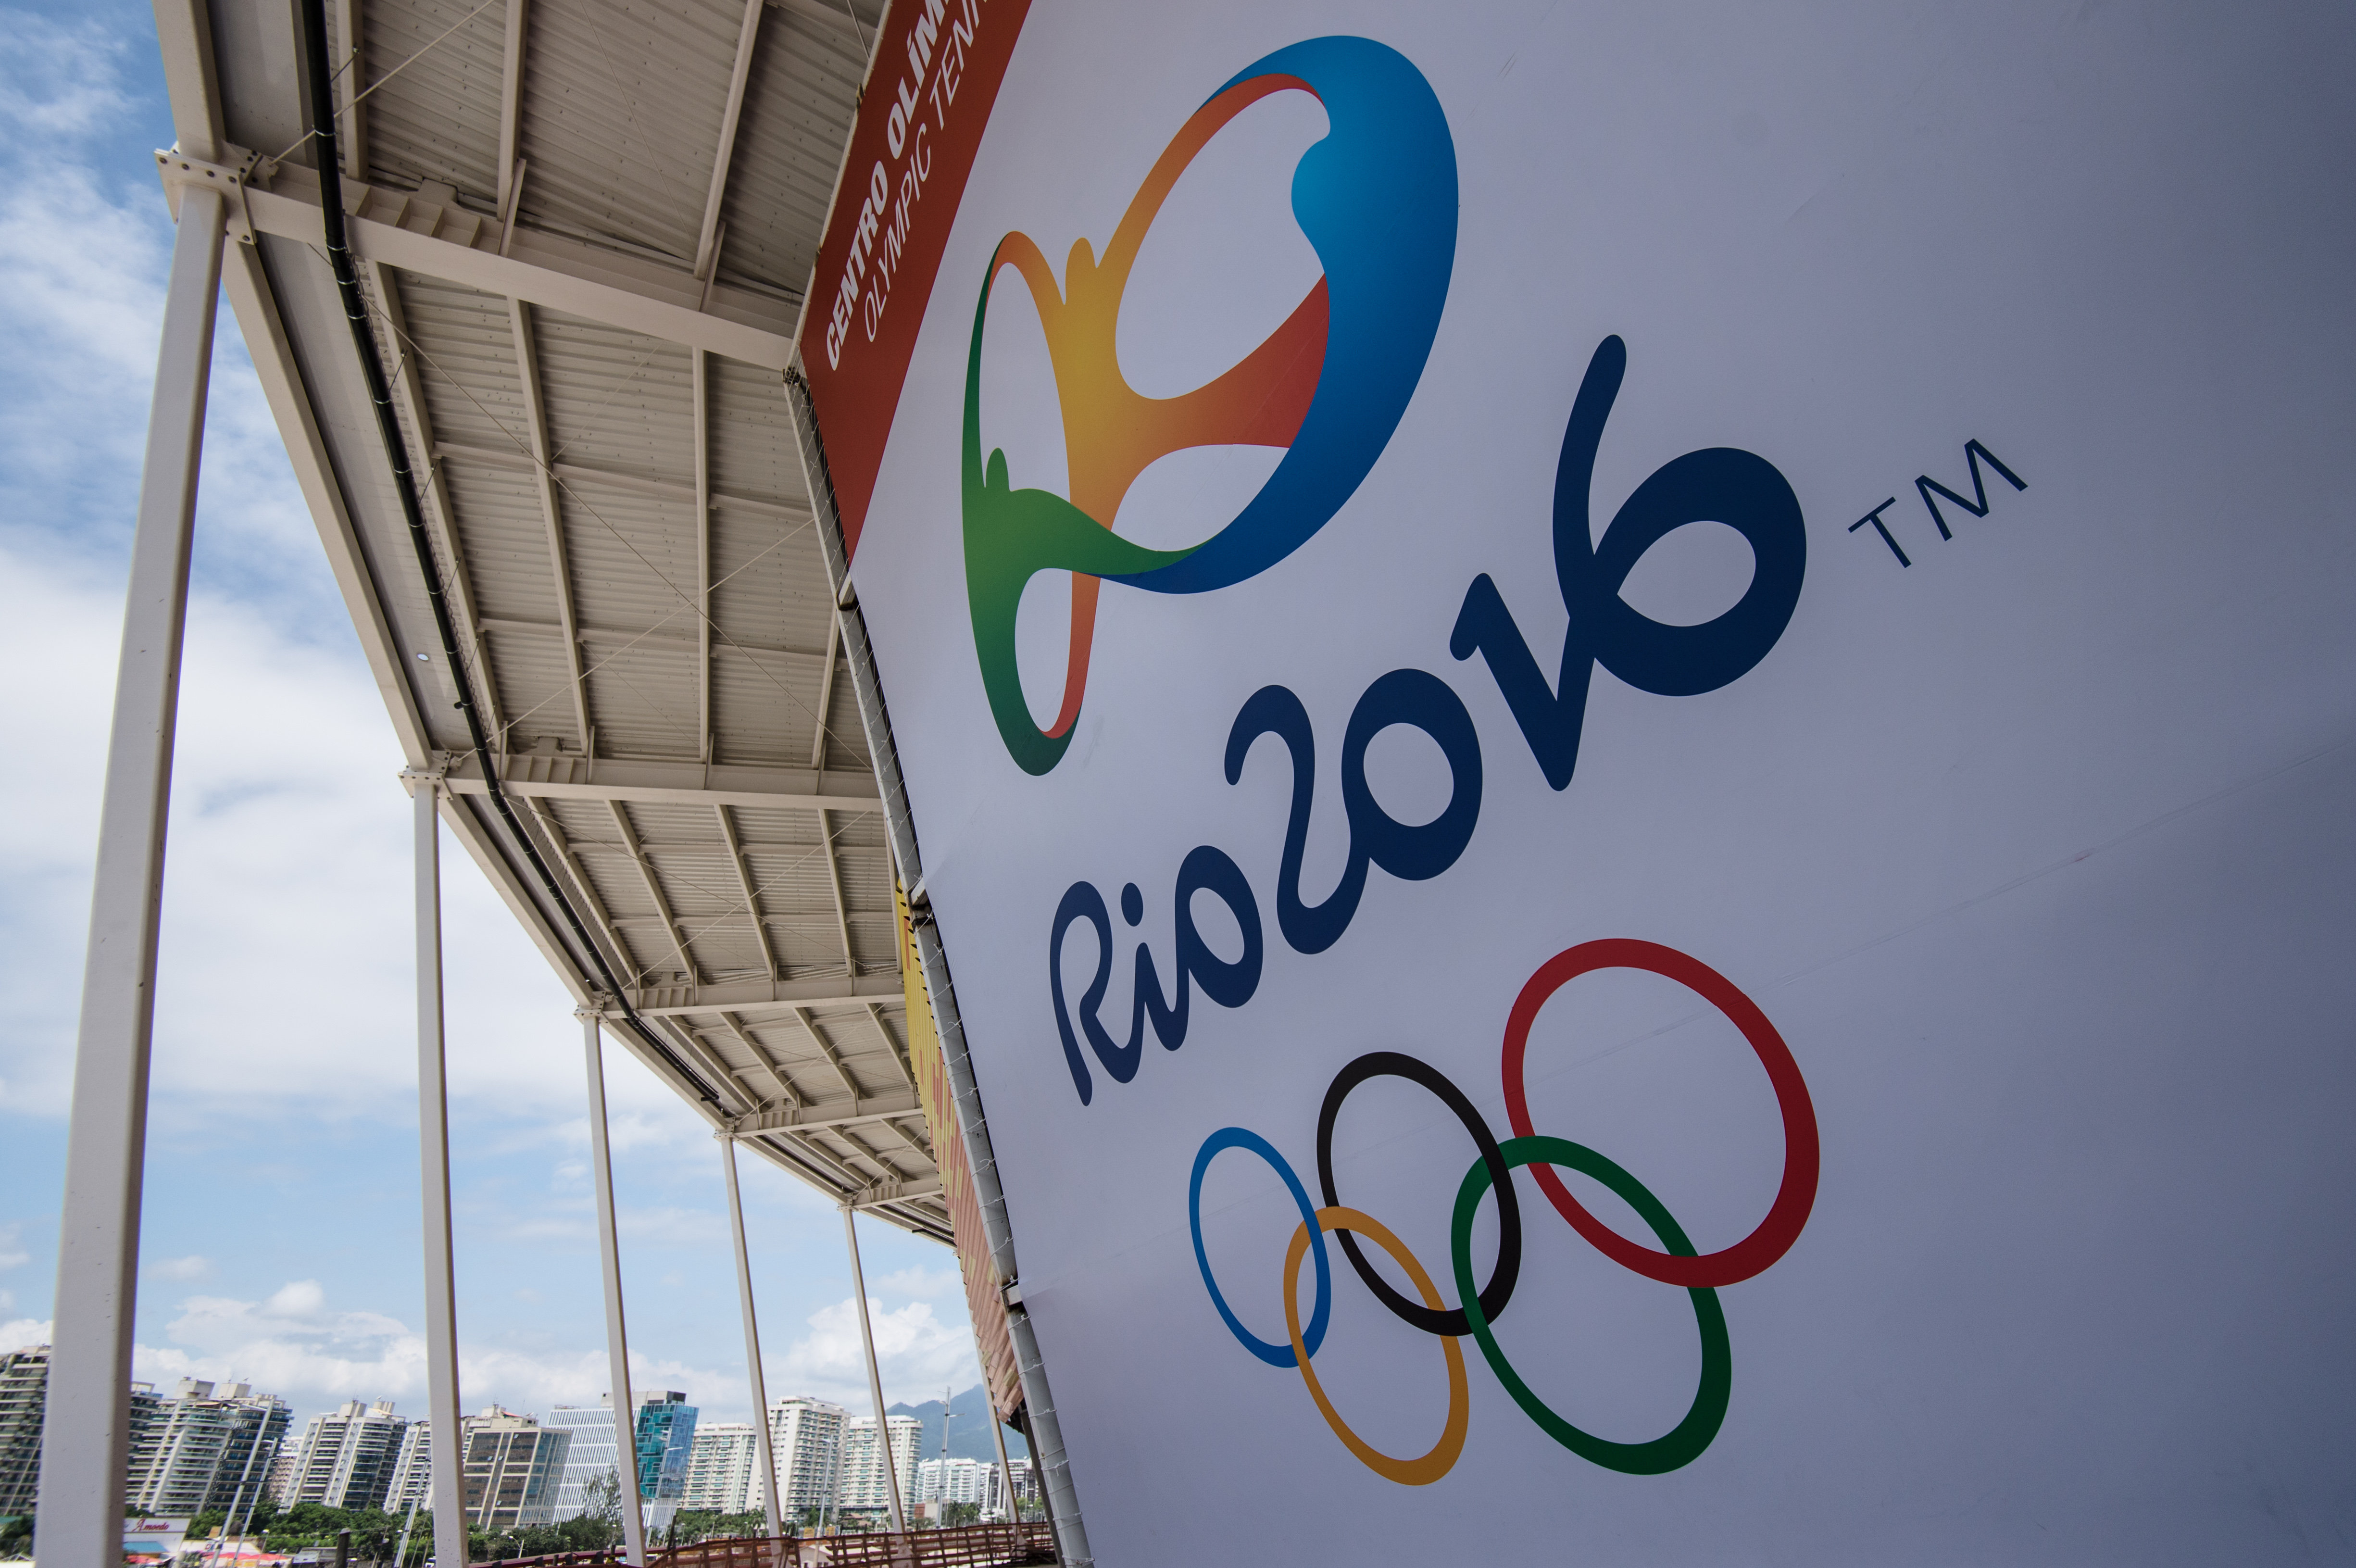 A banner with the Olympic logo for the Rio 2016 Olympic Games seen at the Olympic Tennis Centre of the Olympic Park in Rio de Janeiro, Brazil, on December 11, 2016